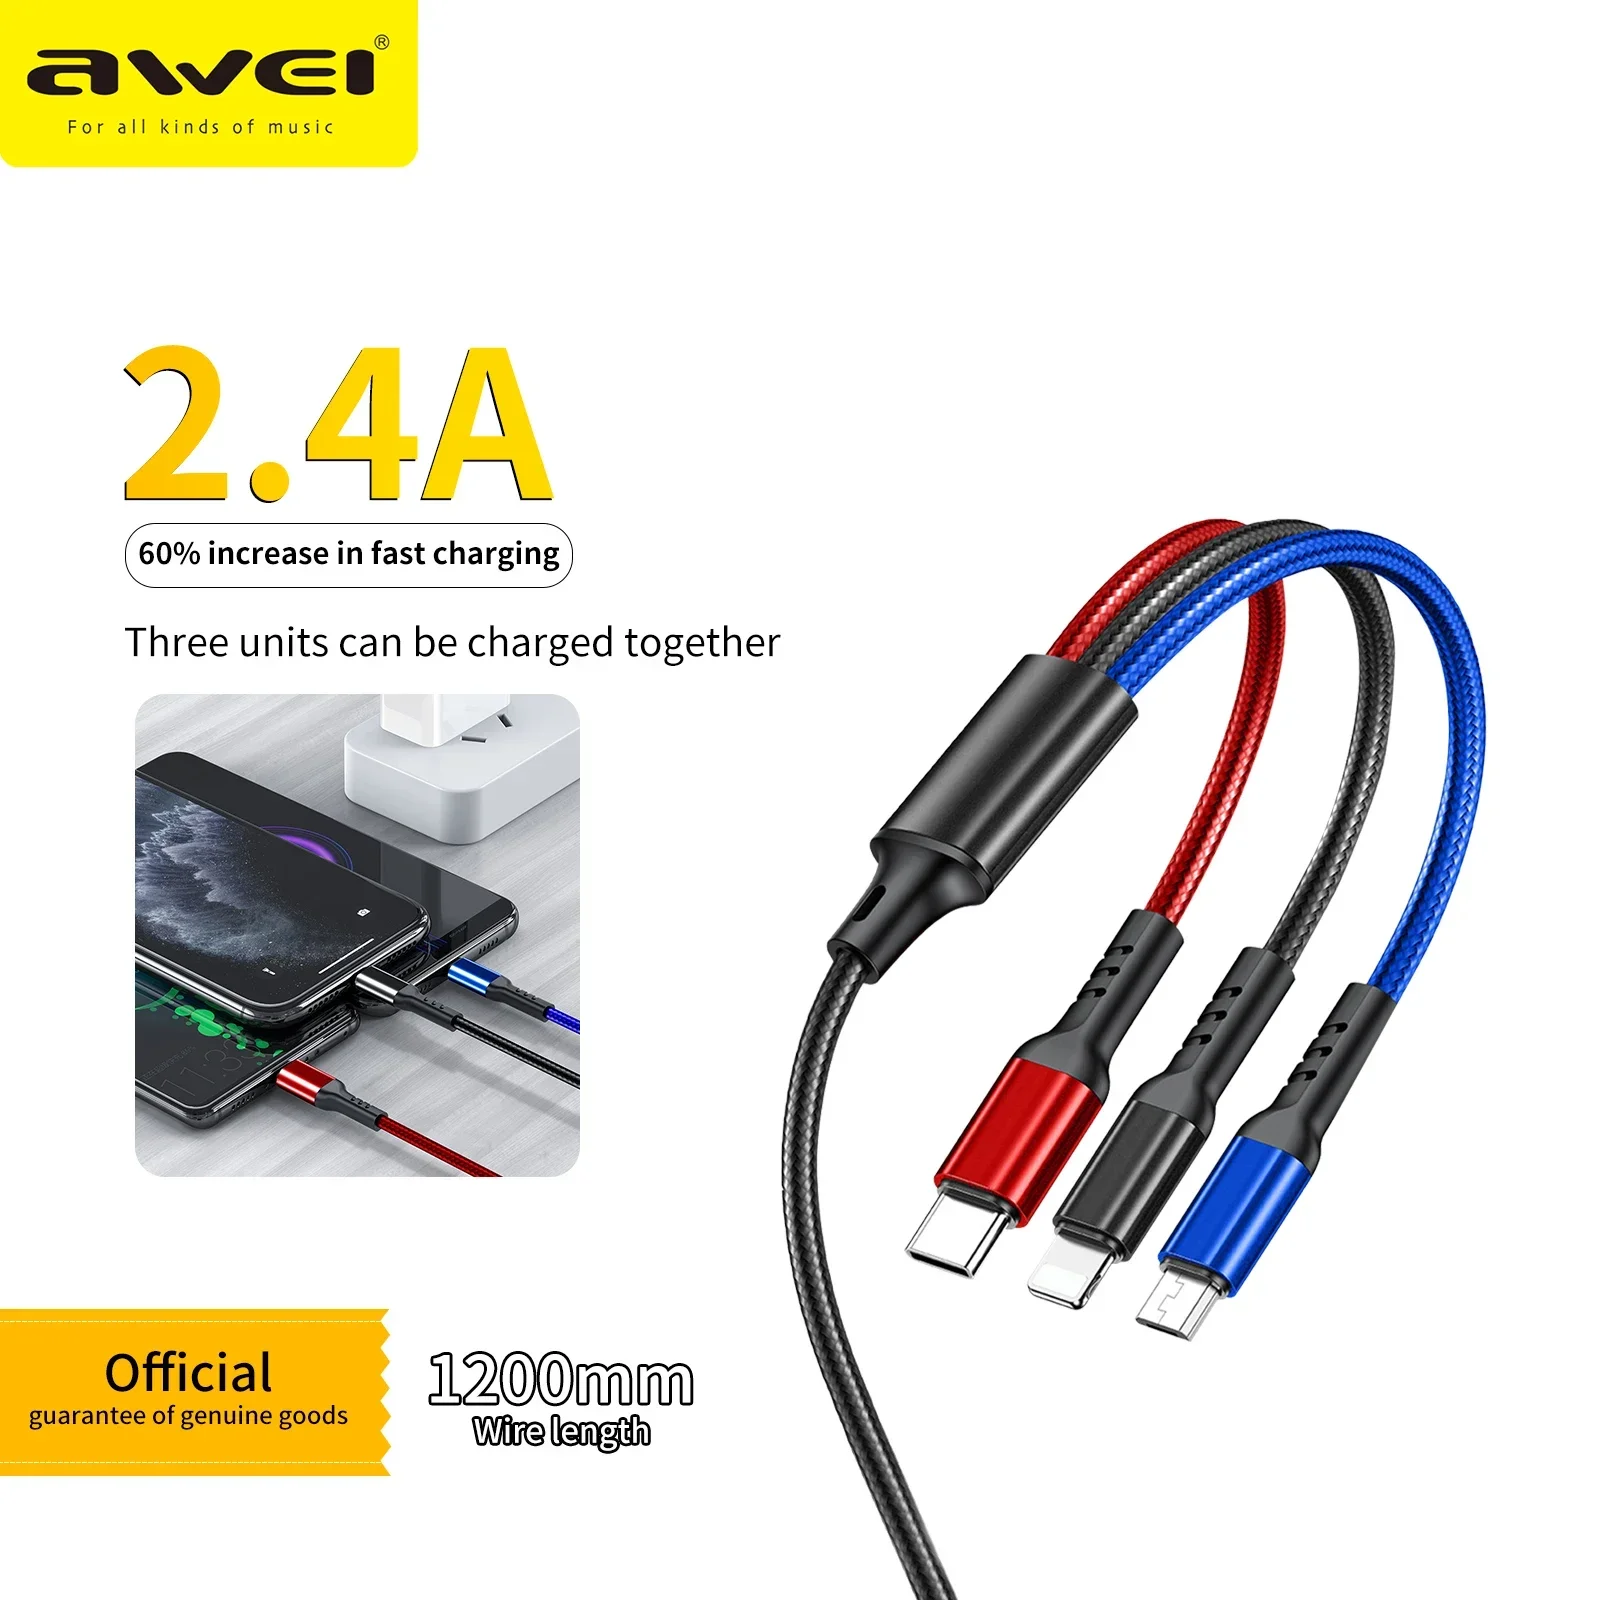 

Awei CL-971 Multi Charger Cable 3 In 1 2.4A Fast Charging Wire For iPhone Xiaomi USB Type C Mobile Phone Cable Muti Ports Cord